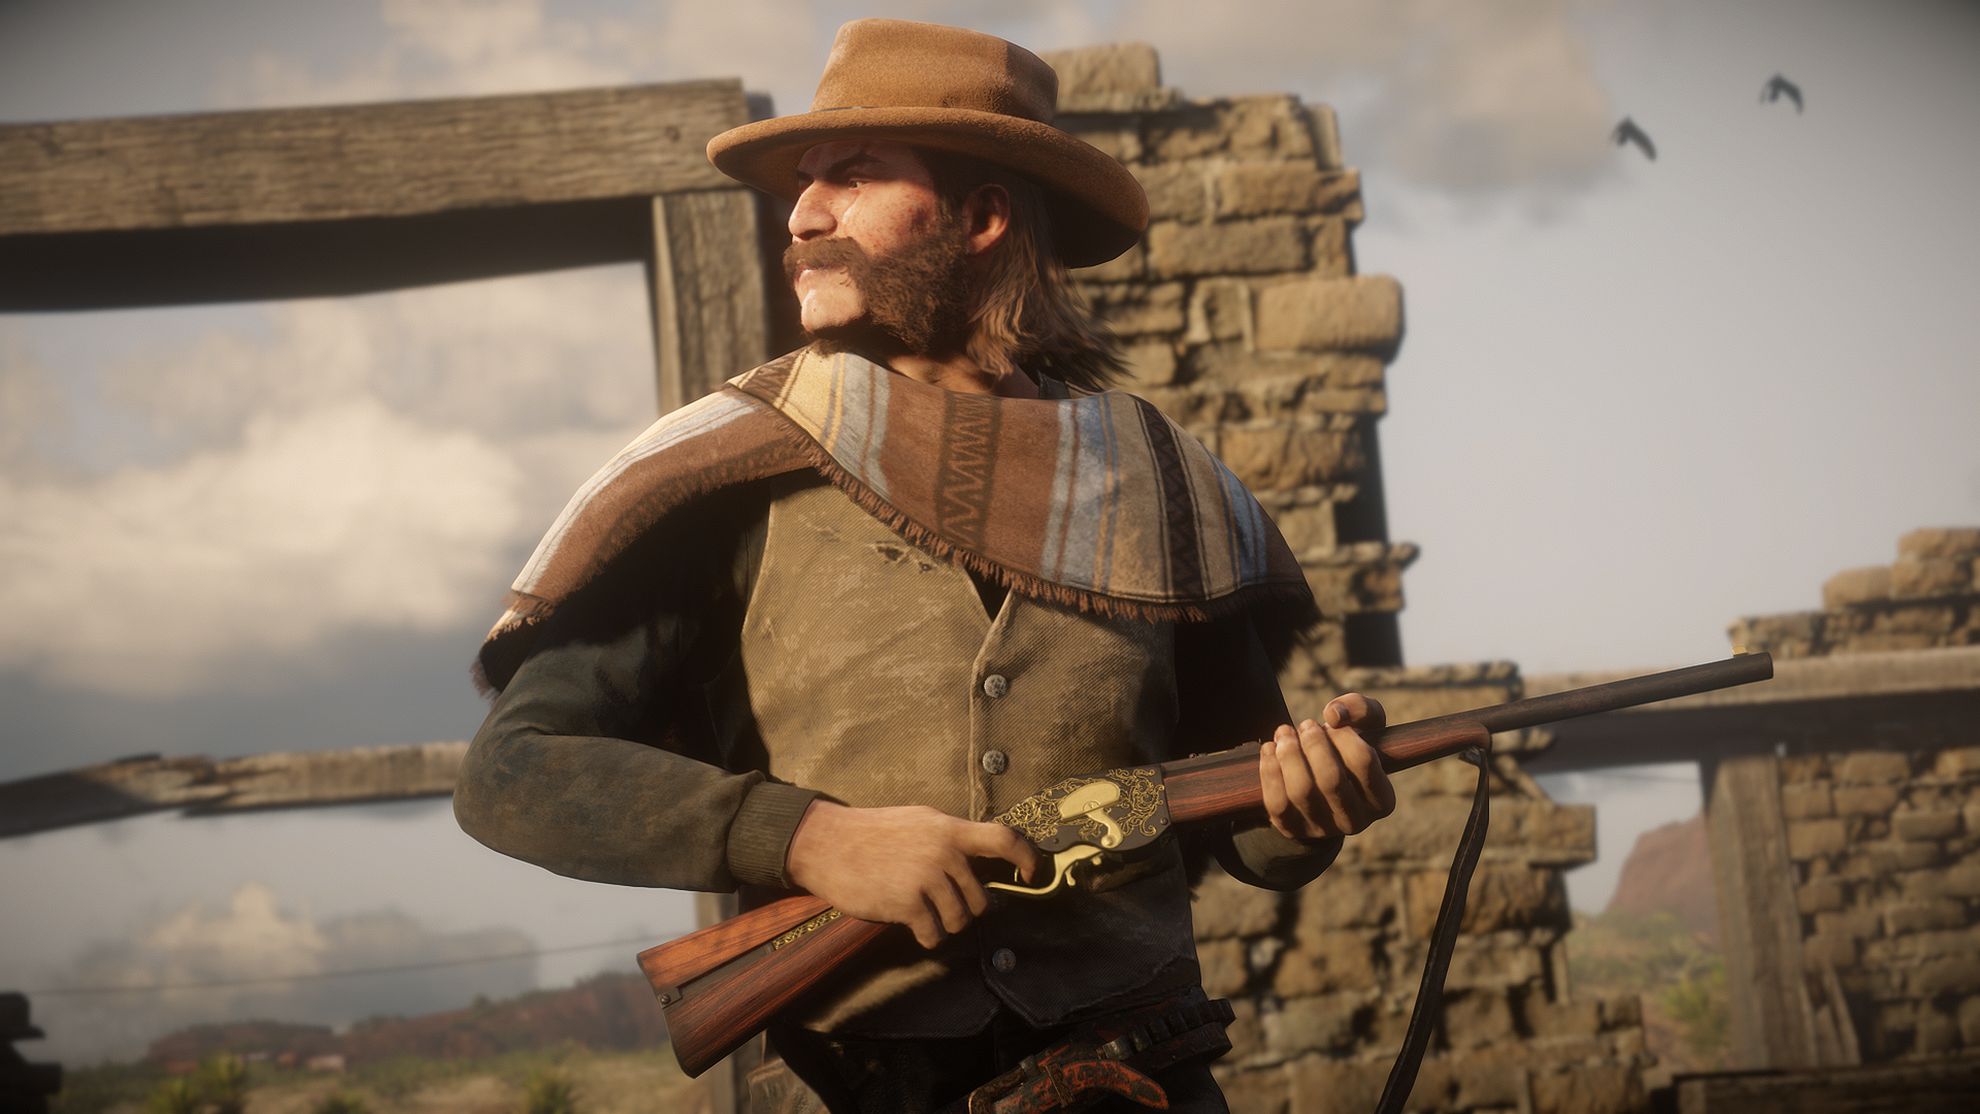 Image for Red Dead Online: get 30% bonus cash and XP in all Free Roam Missions, free Respectful Bow emote